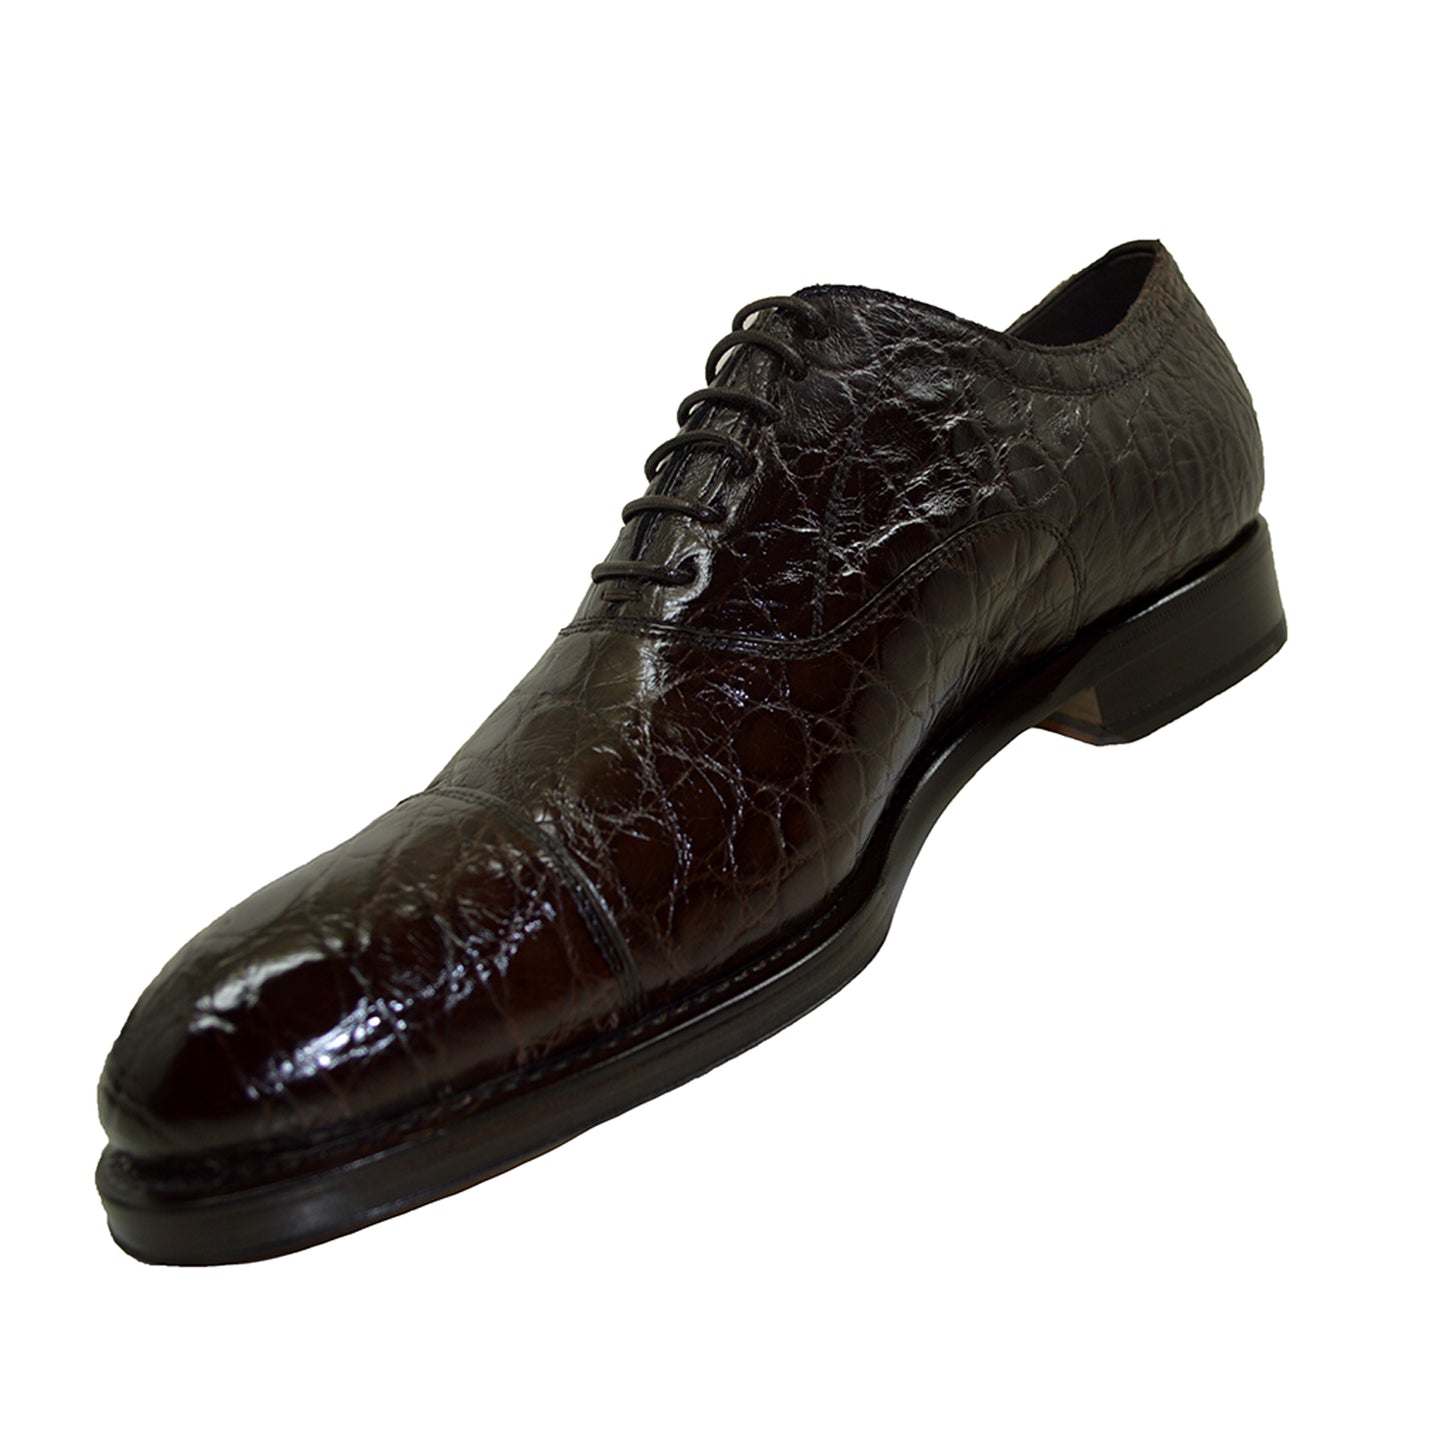 Caporicci 5950 Alligator Flanks Lace Up Brown